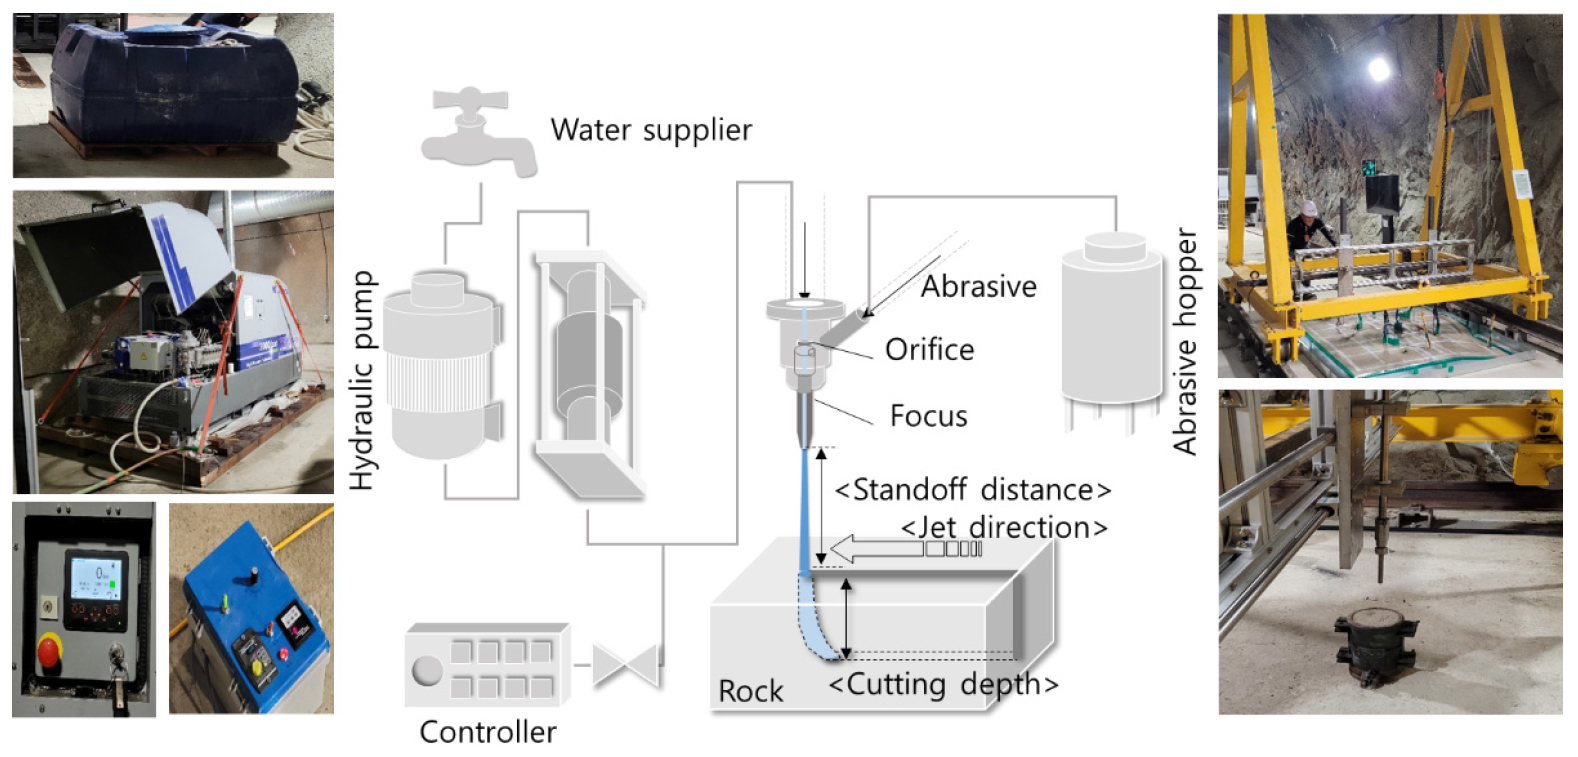 Performance and Reuse of Steel Shot in Abrasive Waterjet Cutting of Granite